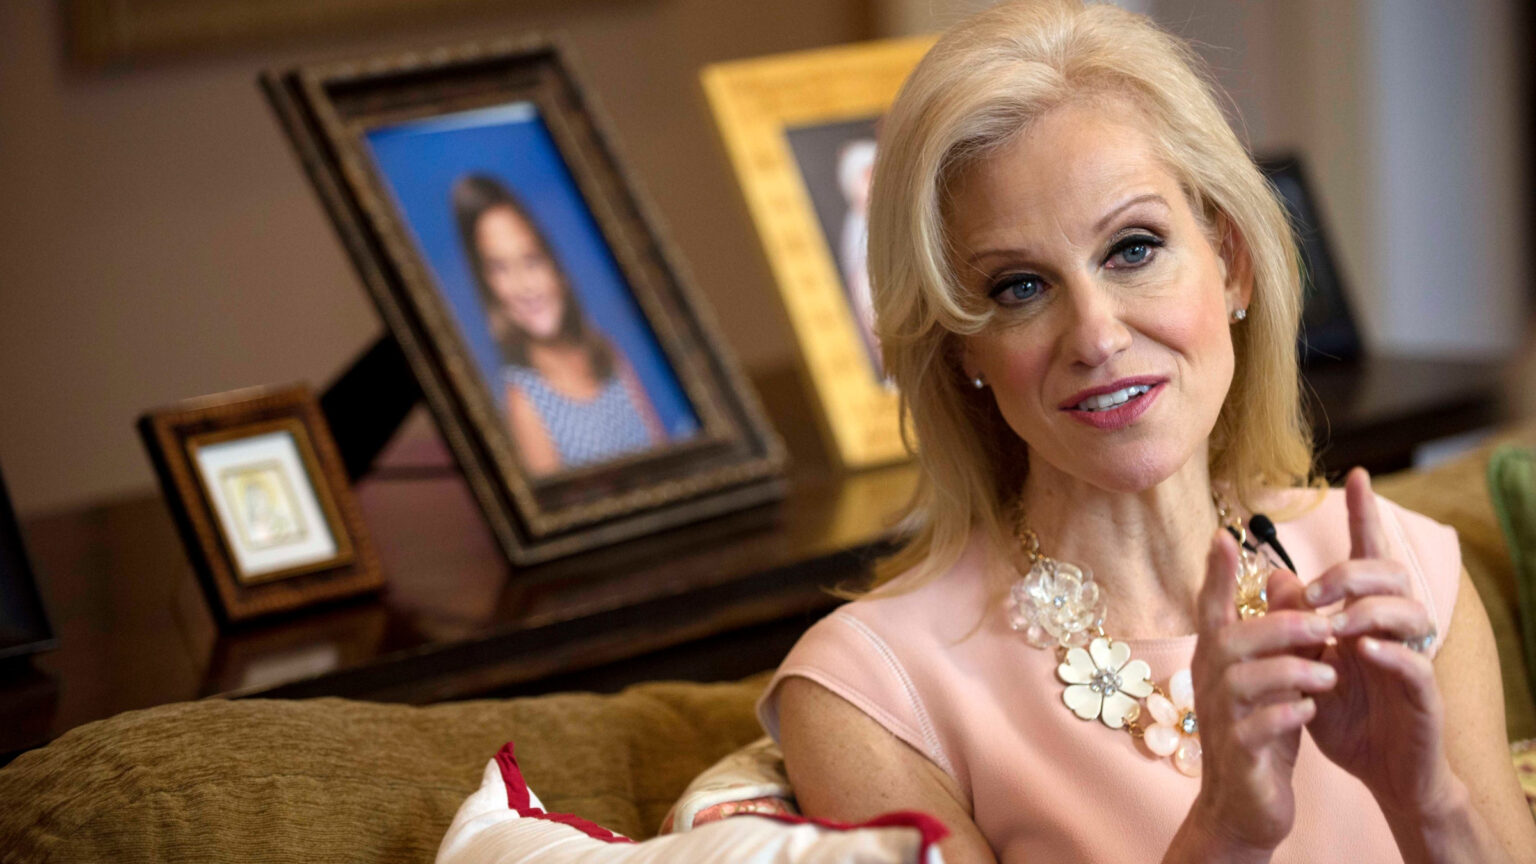 Kellyanne Conway allegedly posted topless photos of her daughter Claudia. Will police investigate how she treats her children? Find out here.